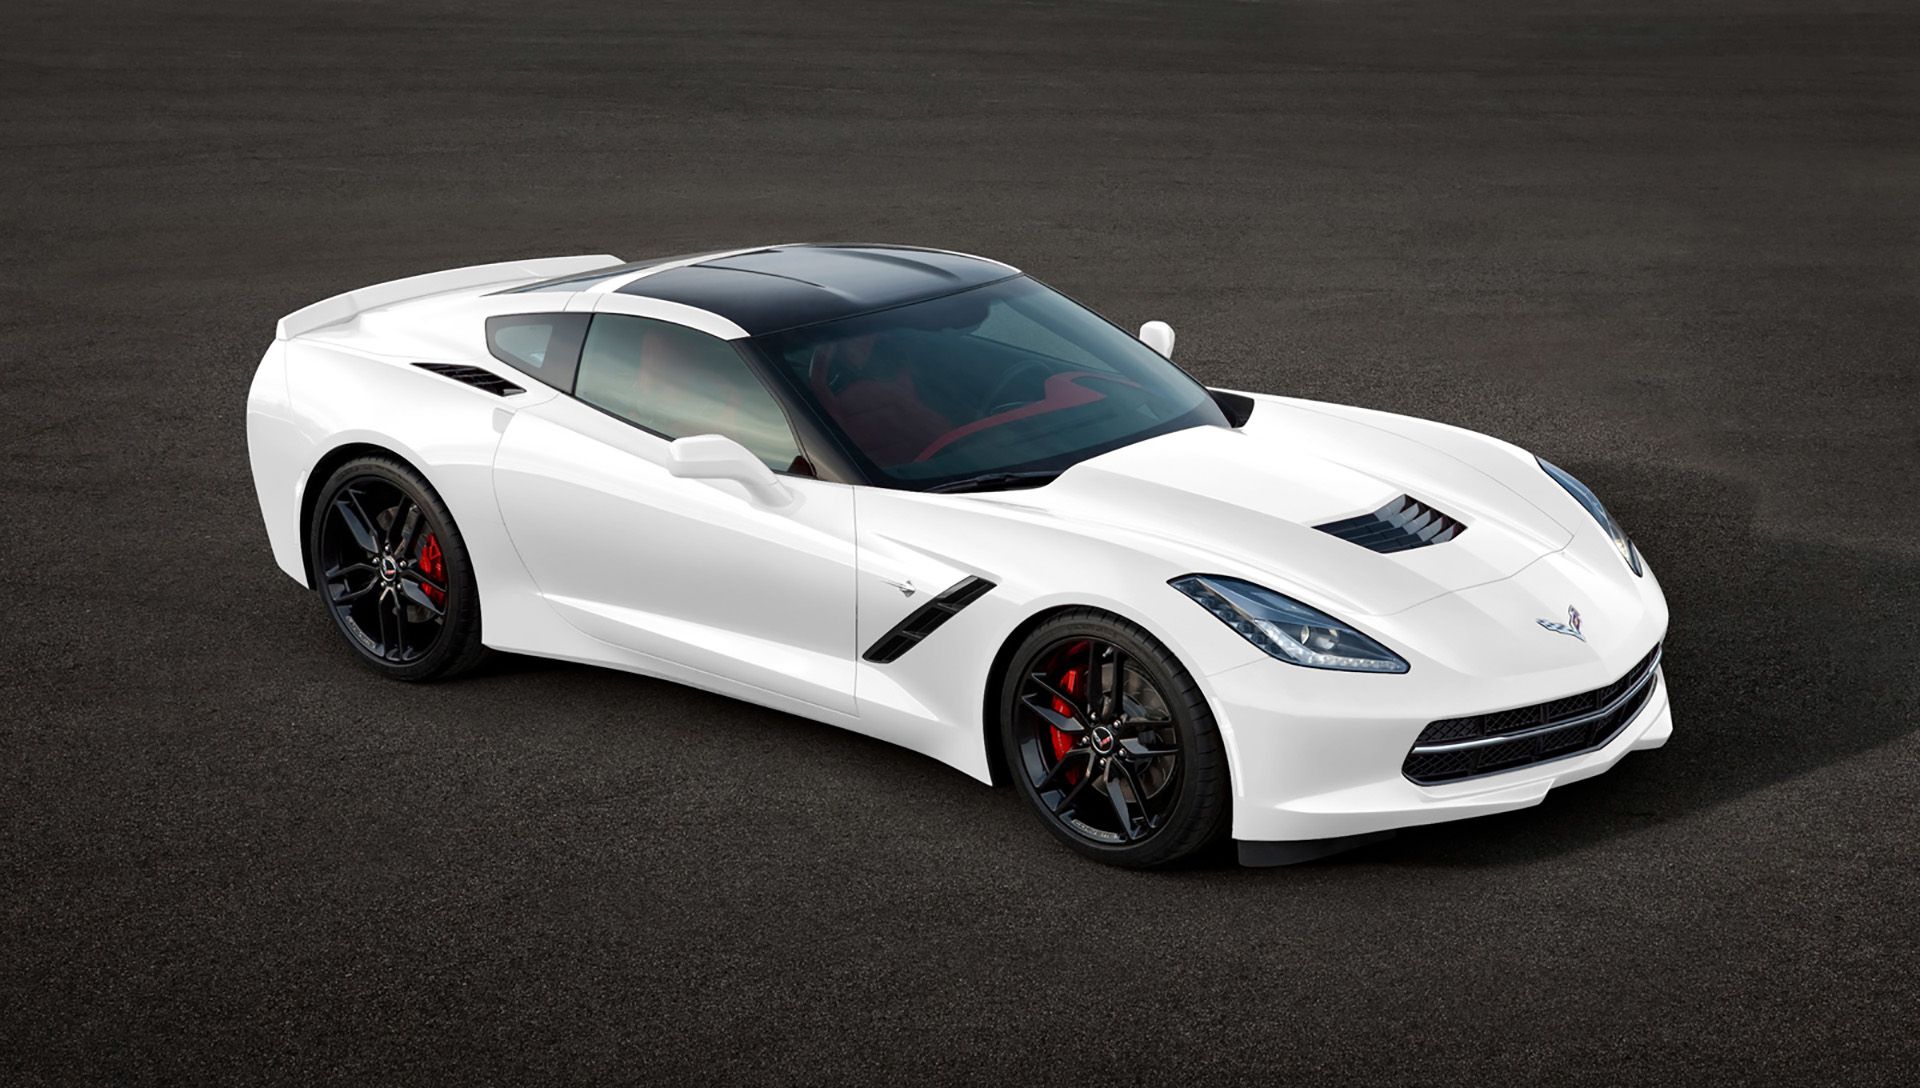 2015 Chevrolet Corvette c7 coupe pictures, information and specs